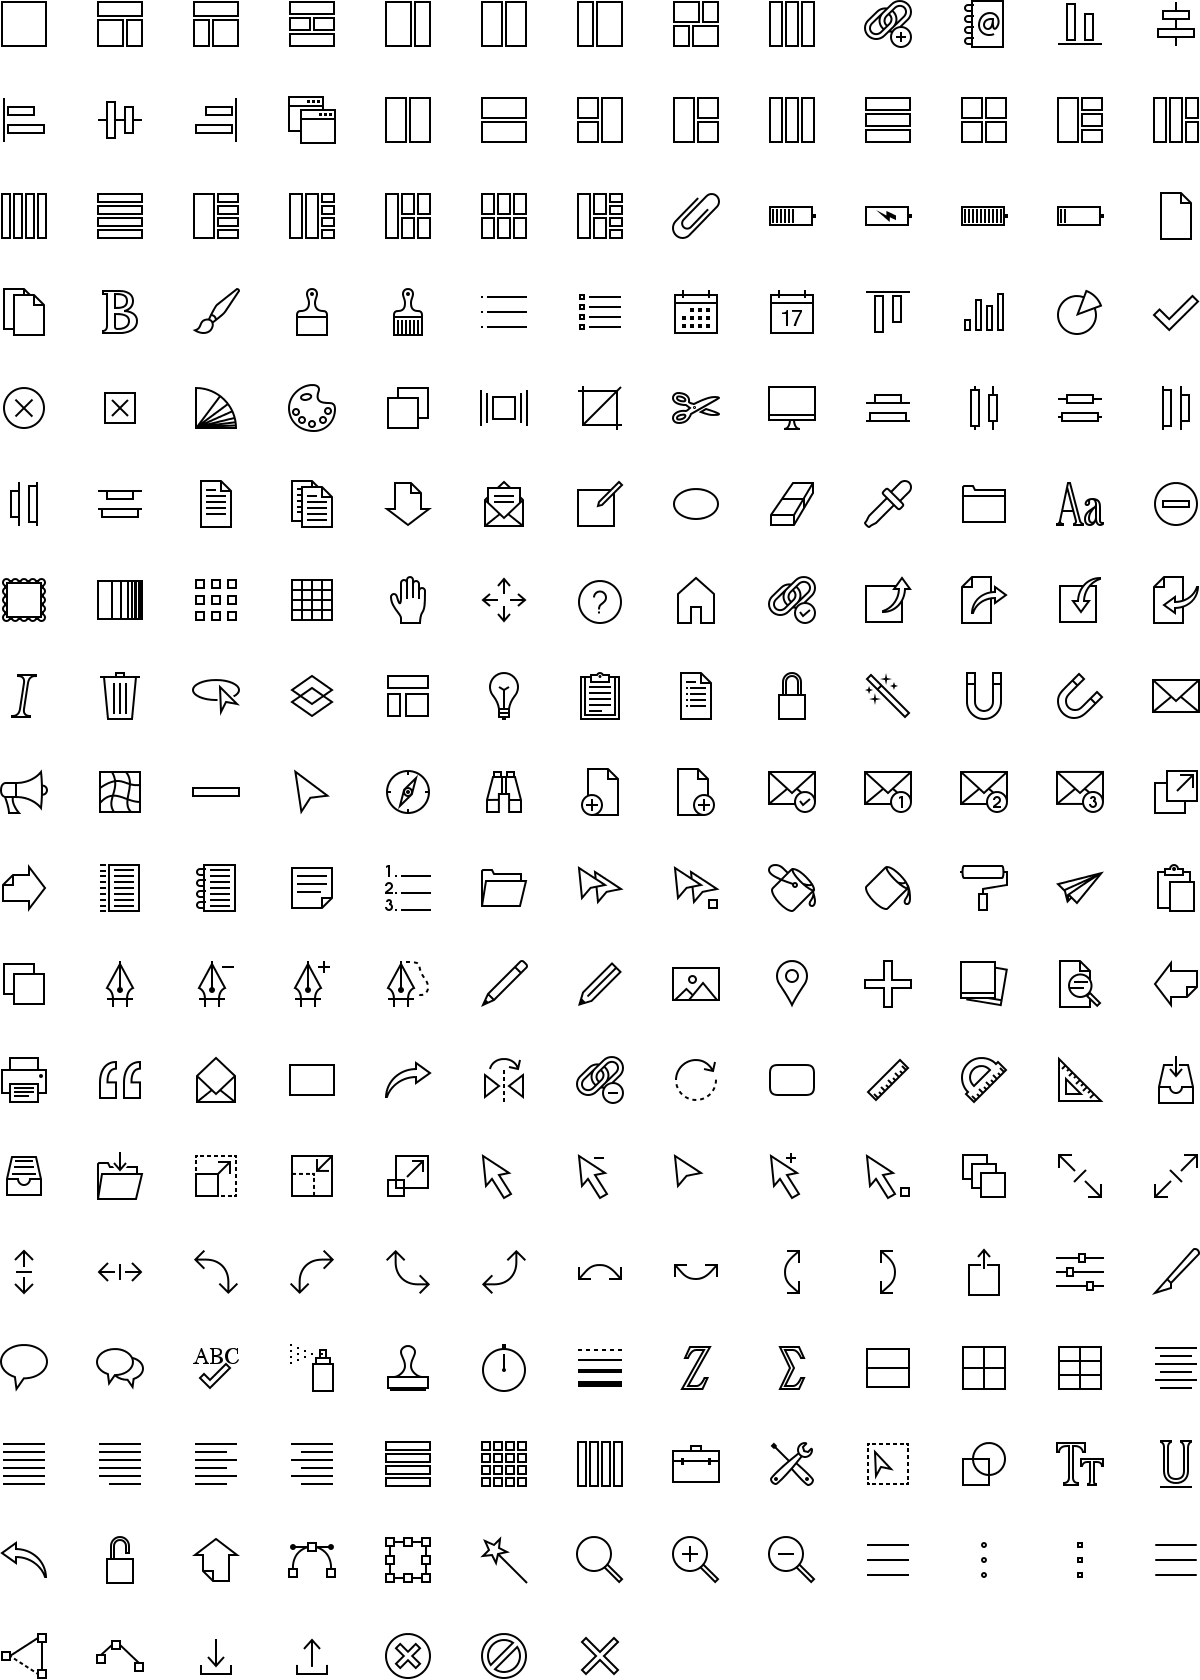 Software icons in outline style